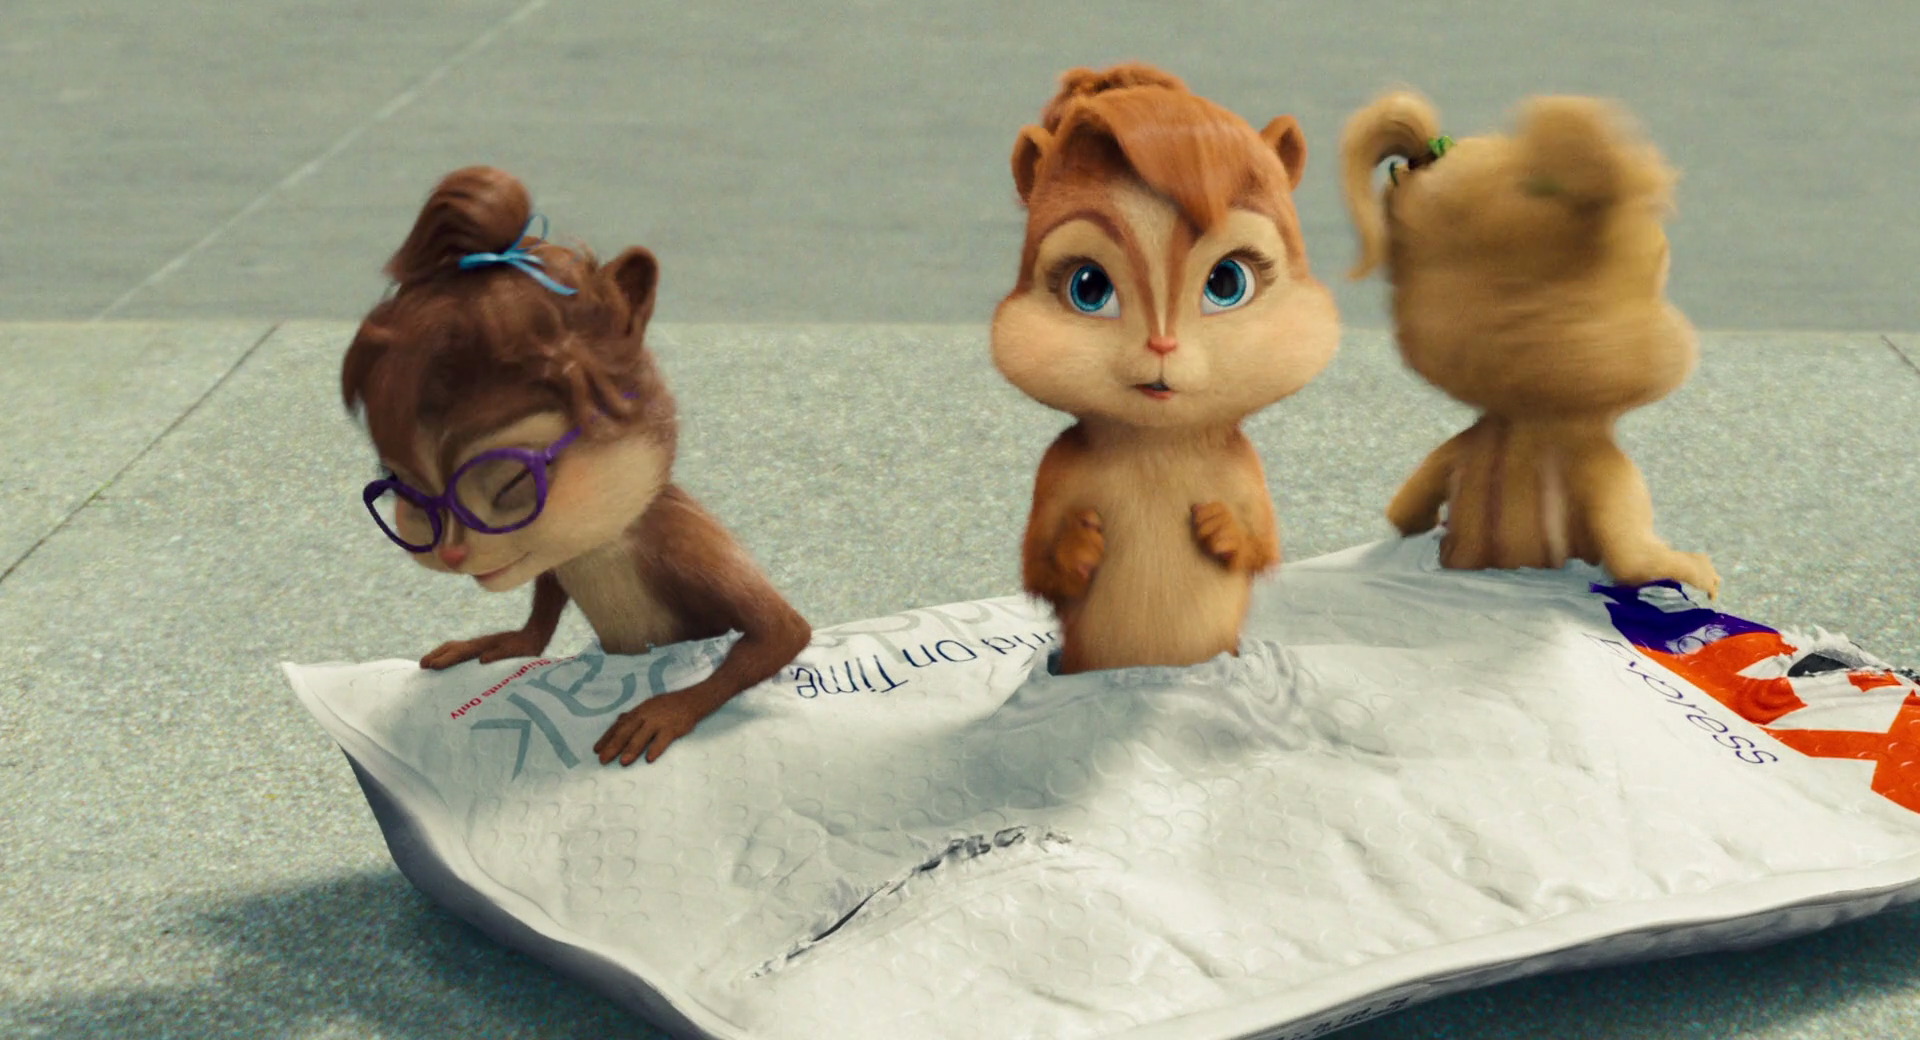 alvin and the chipmunks Images on Fanpop.